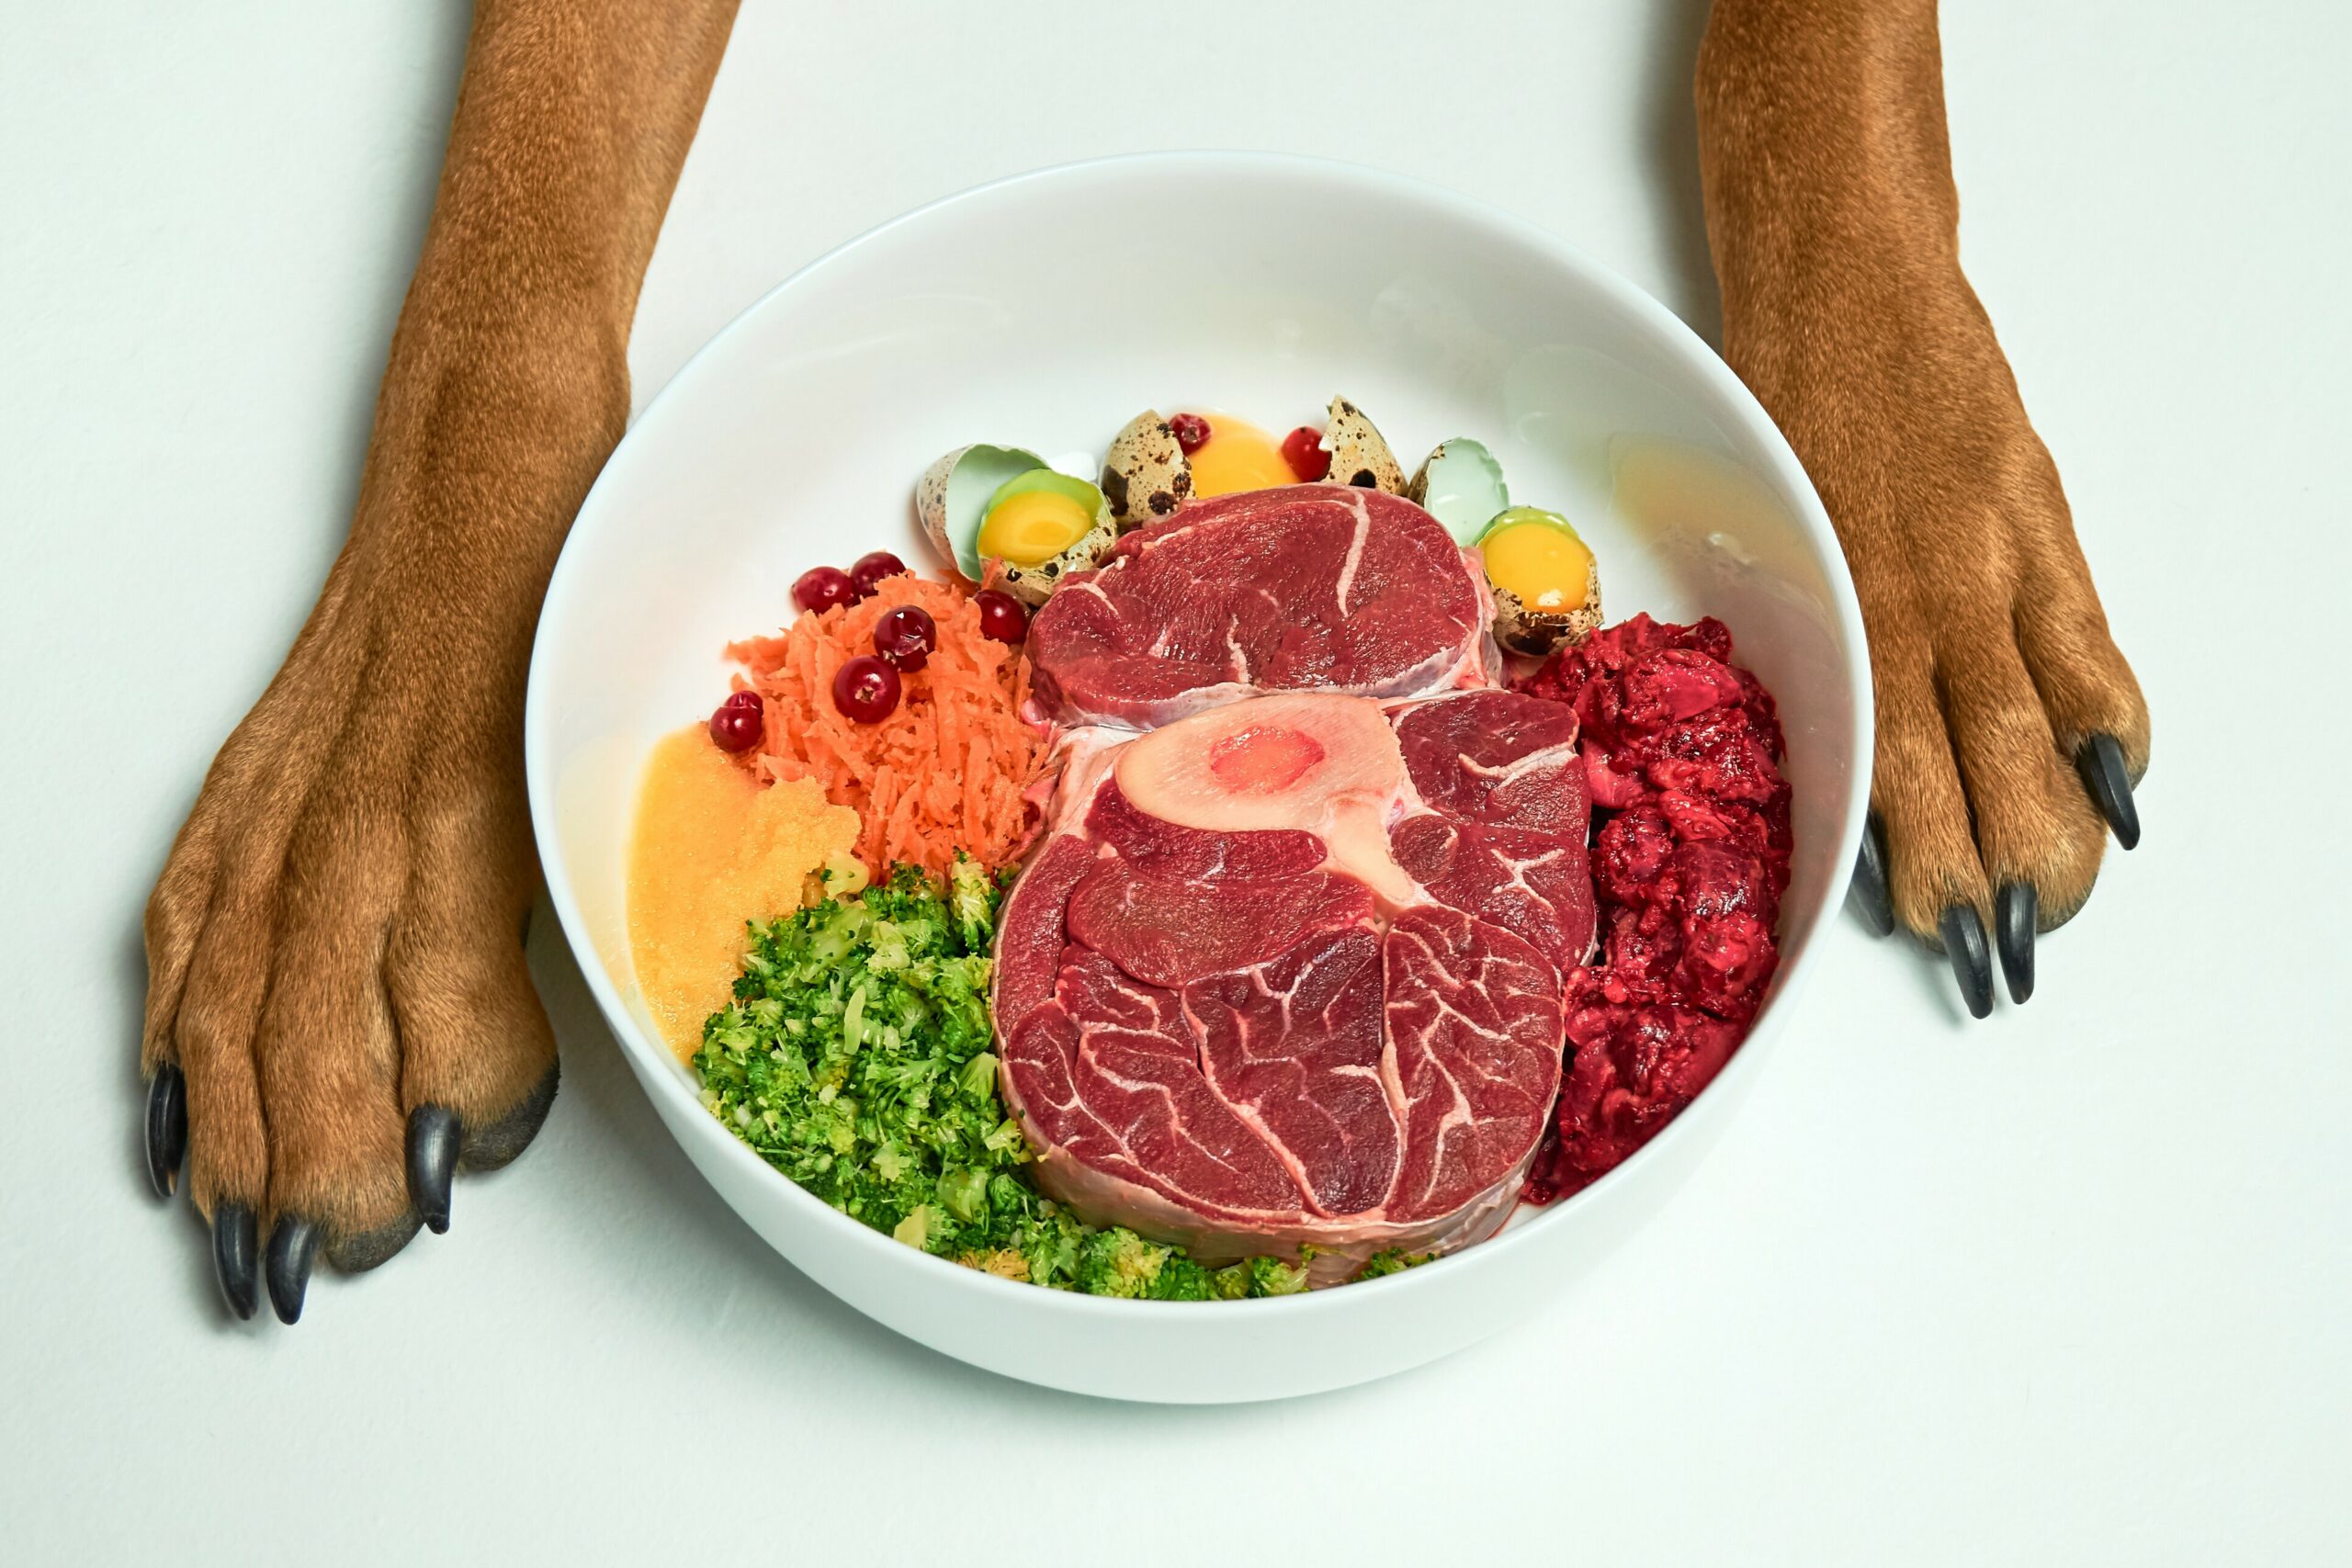 are you supposed to feed dogs raw meat